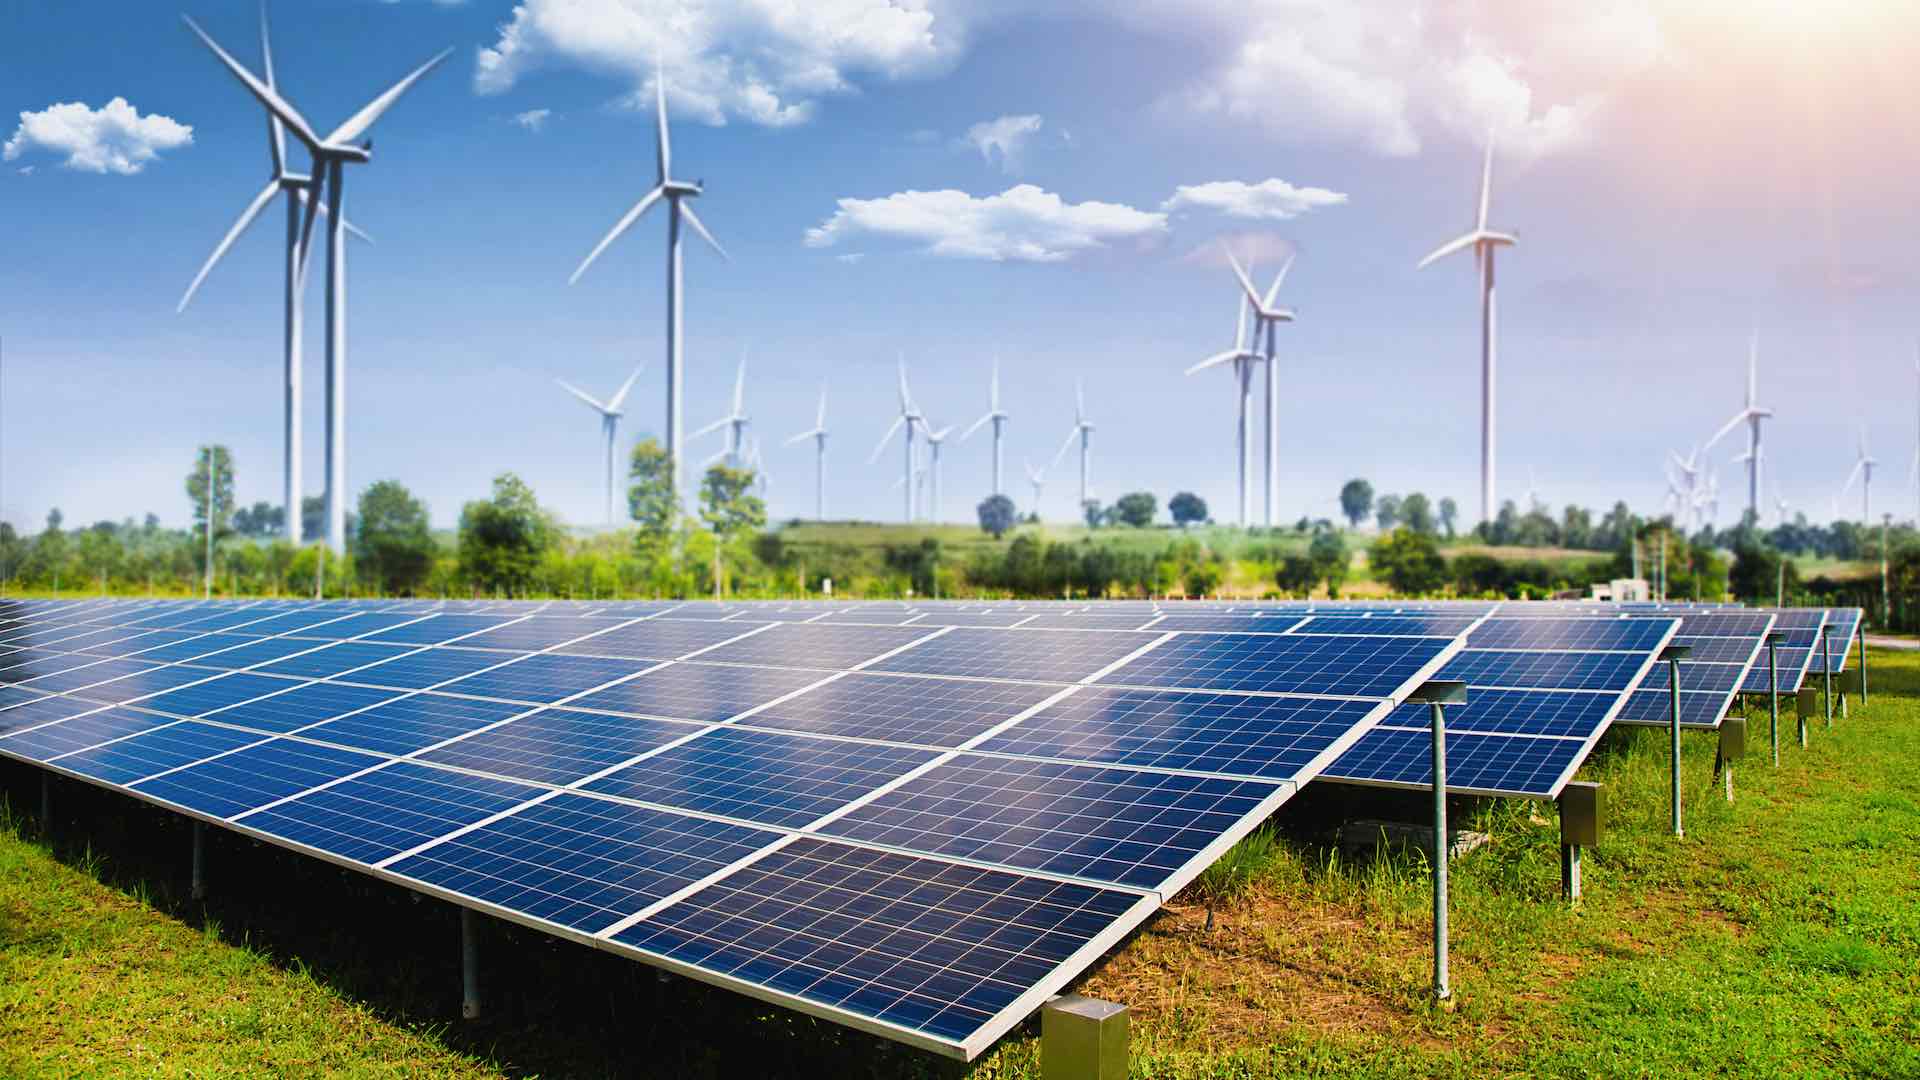 The intricate path towards tripling global renewable energy by 2030